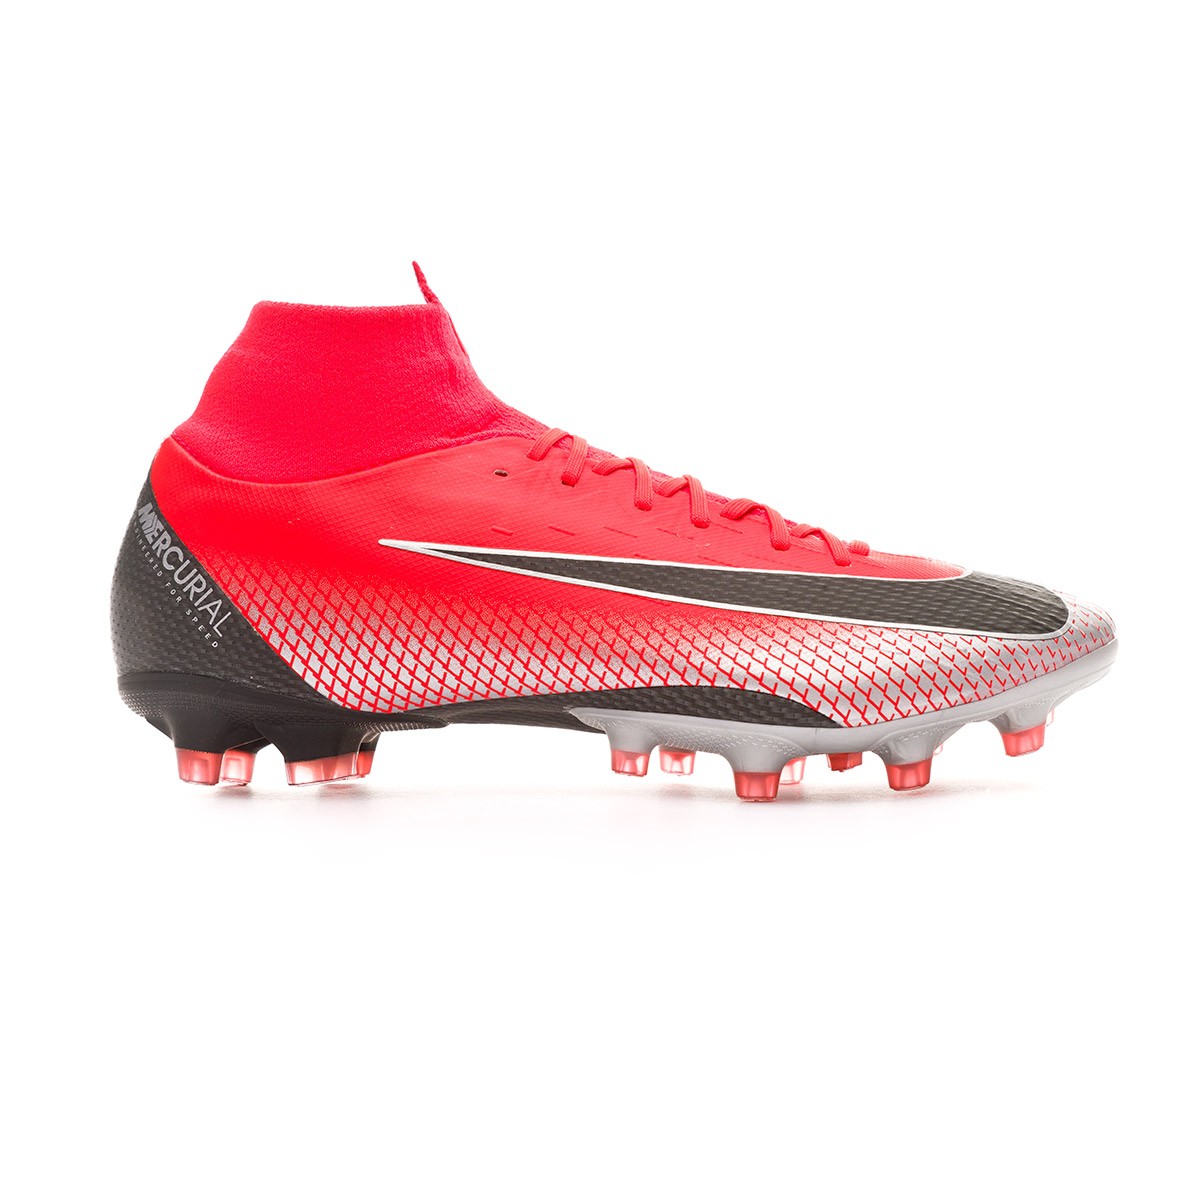 grey cr7 boots